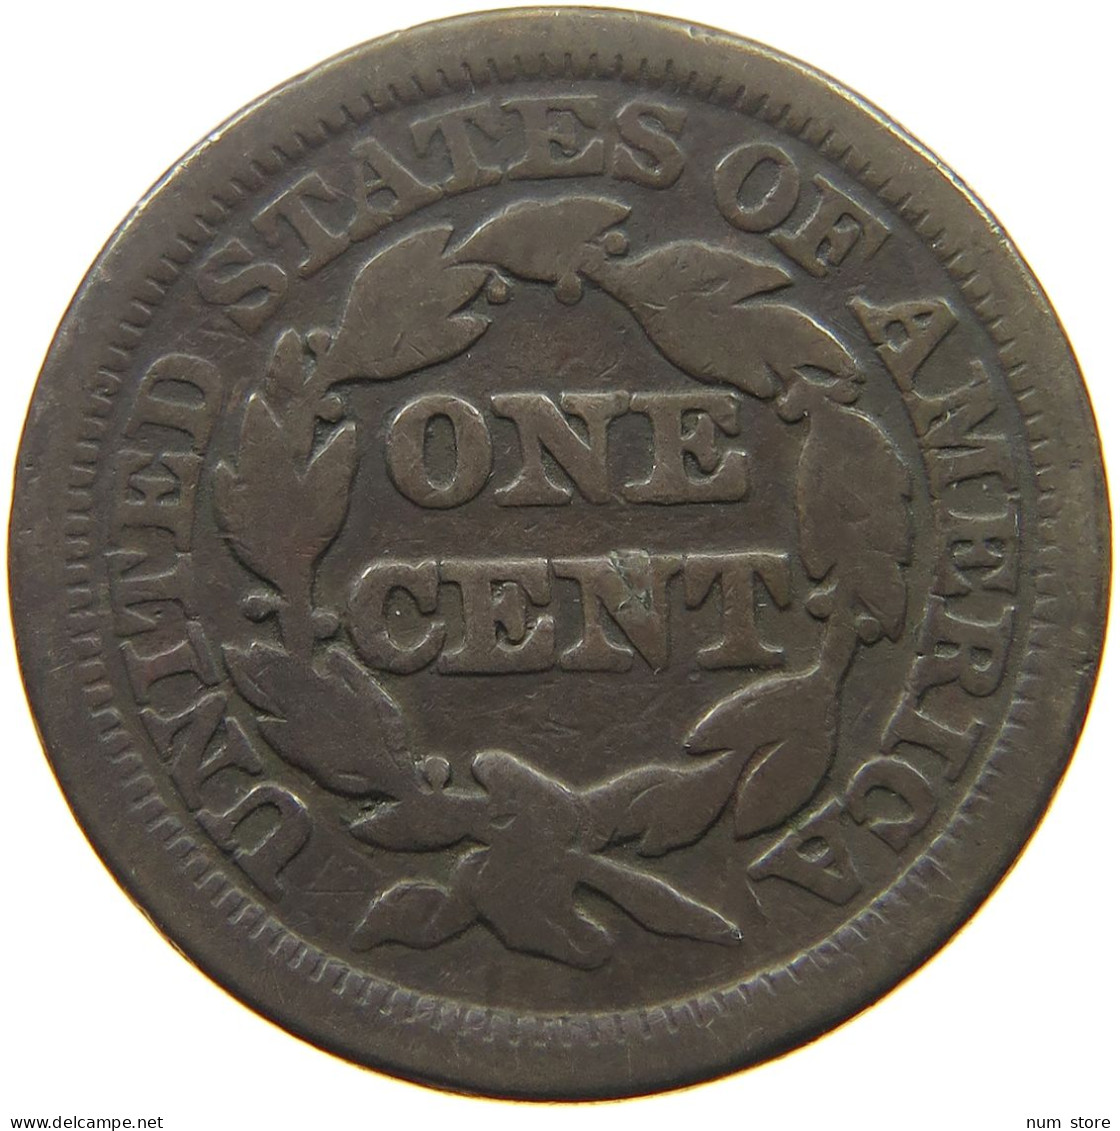 UNITED STATES OF AMERICA LARGE CENT 1845 BRAIDED HAIR #t141 0311 - 1840-1857: Braided Hair (Cheveux Tressés)